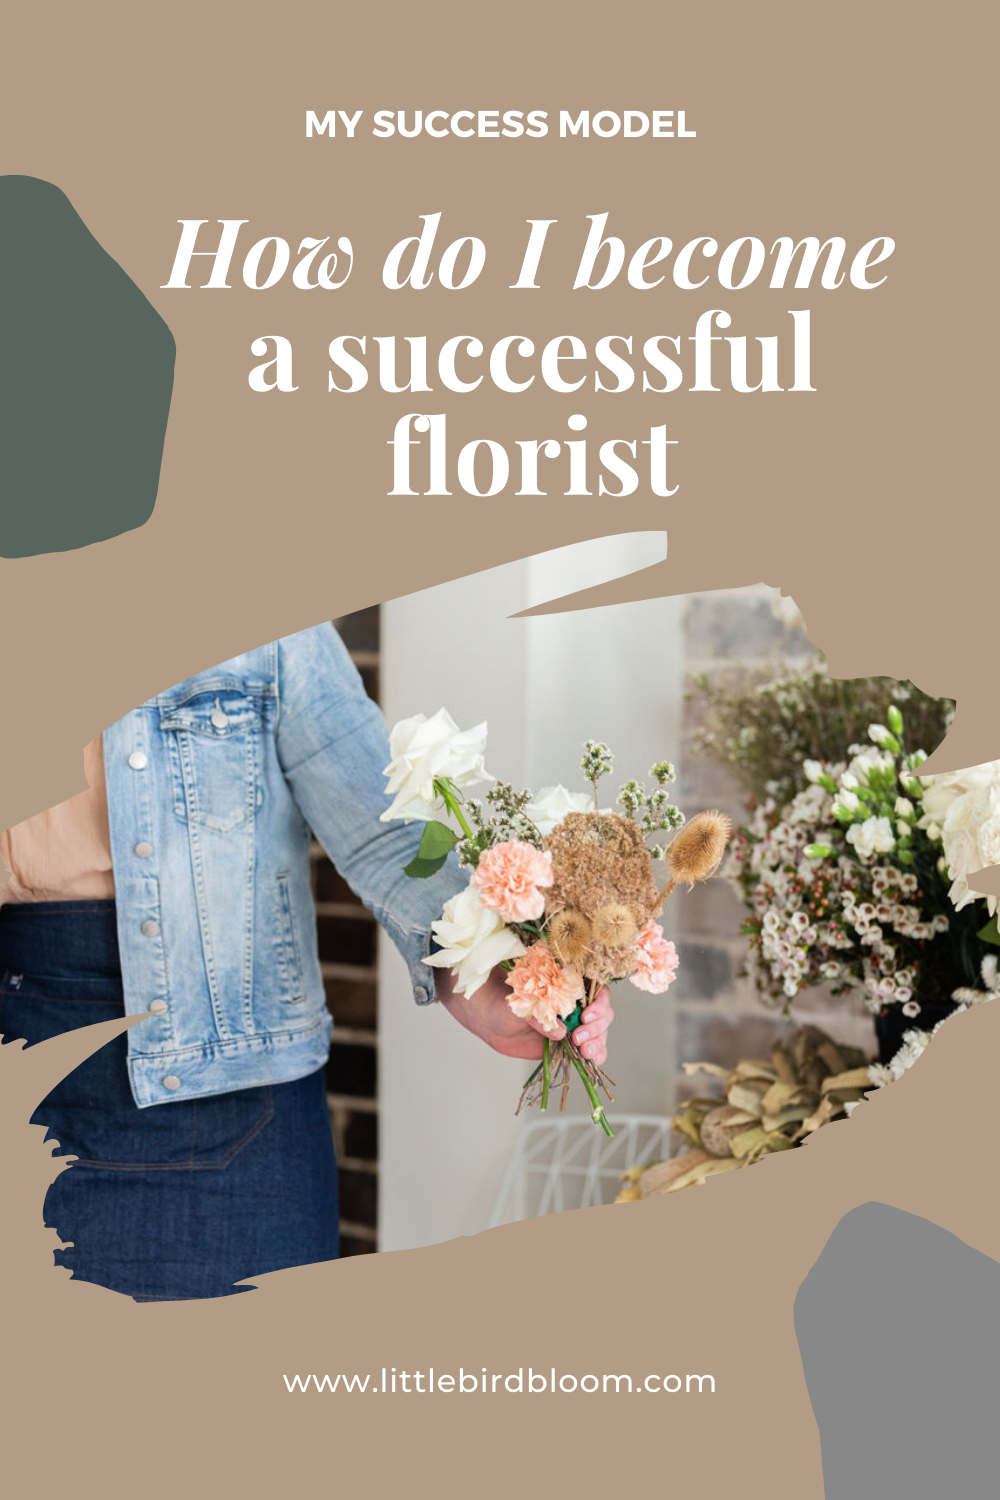 LBB Blog Images - How do I become a successful florist?